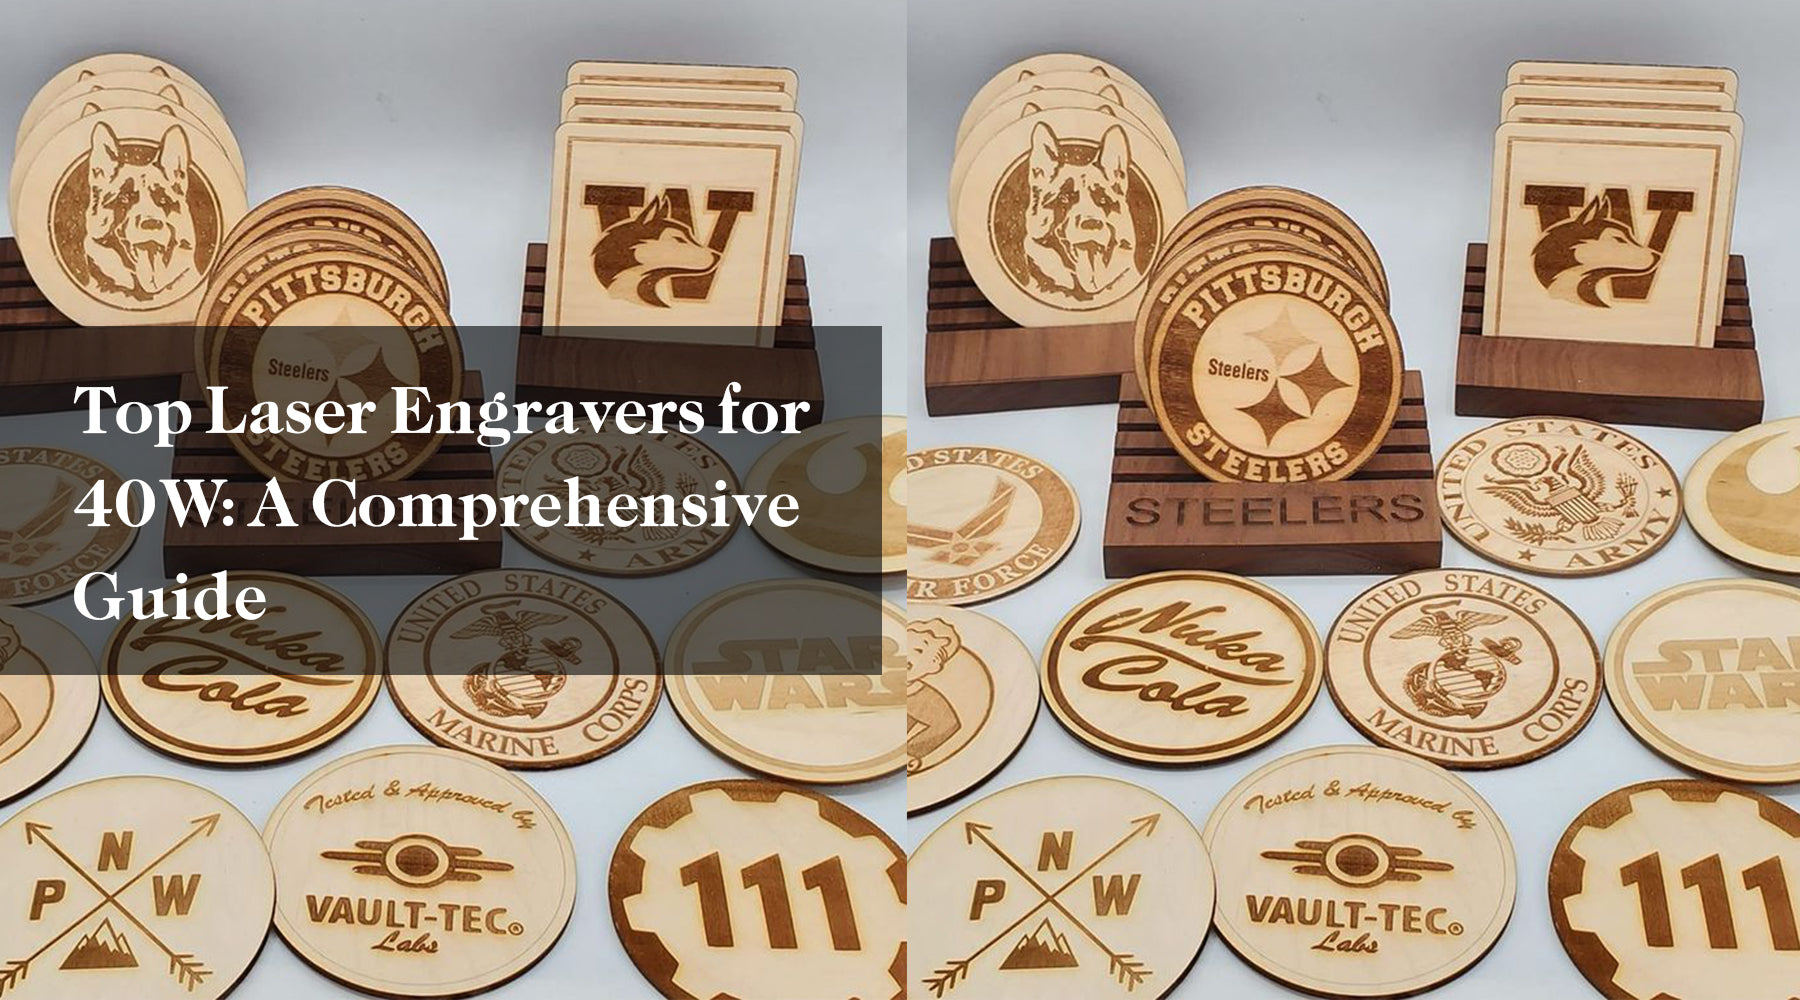 Top Laser Engravers for 40W: A Comprehensive Guide